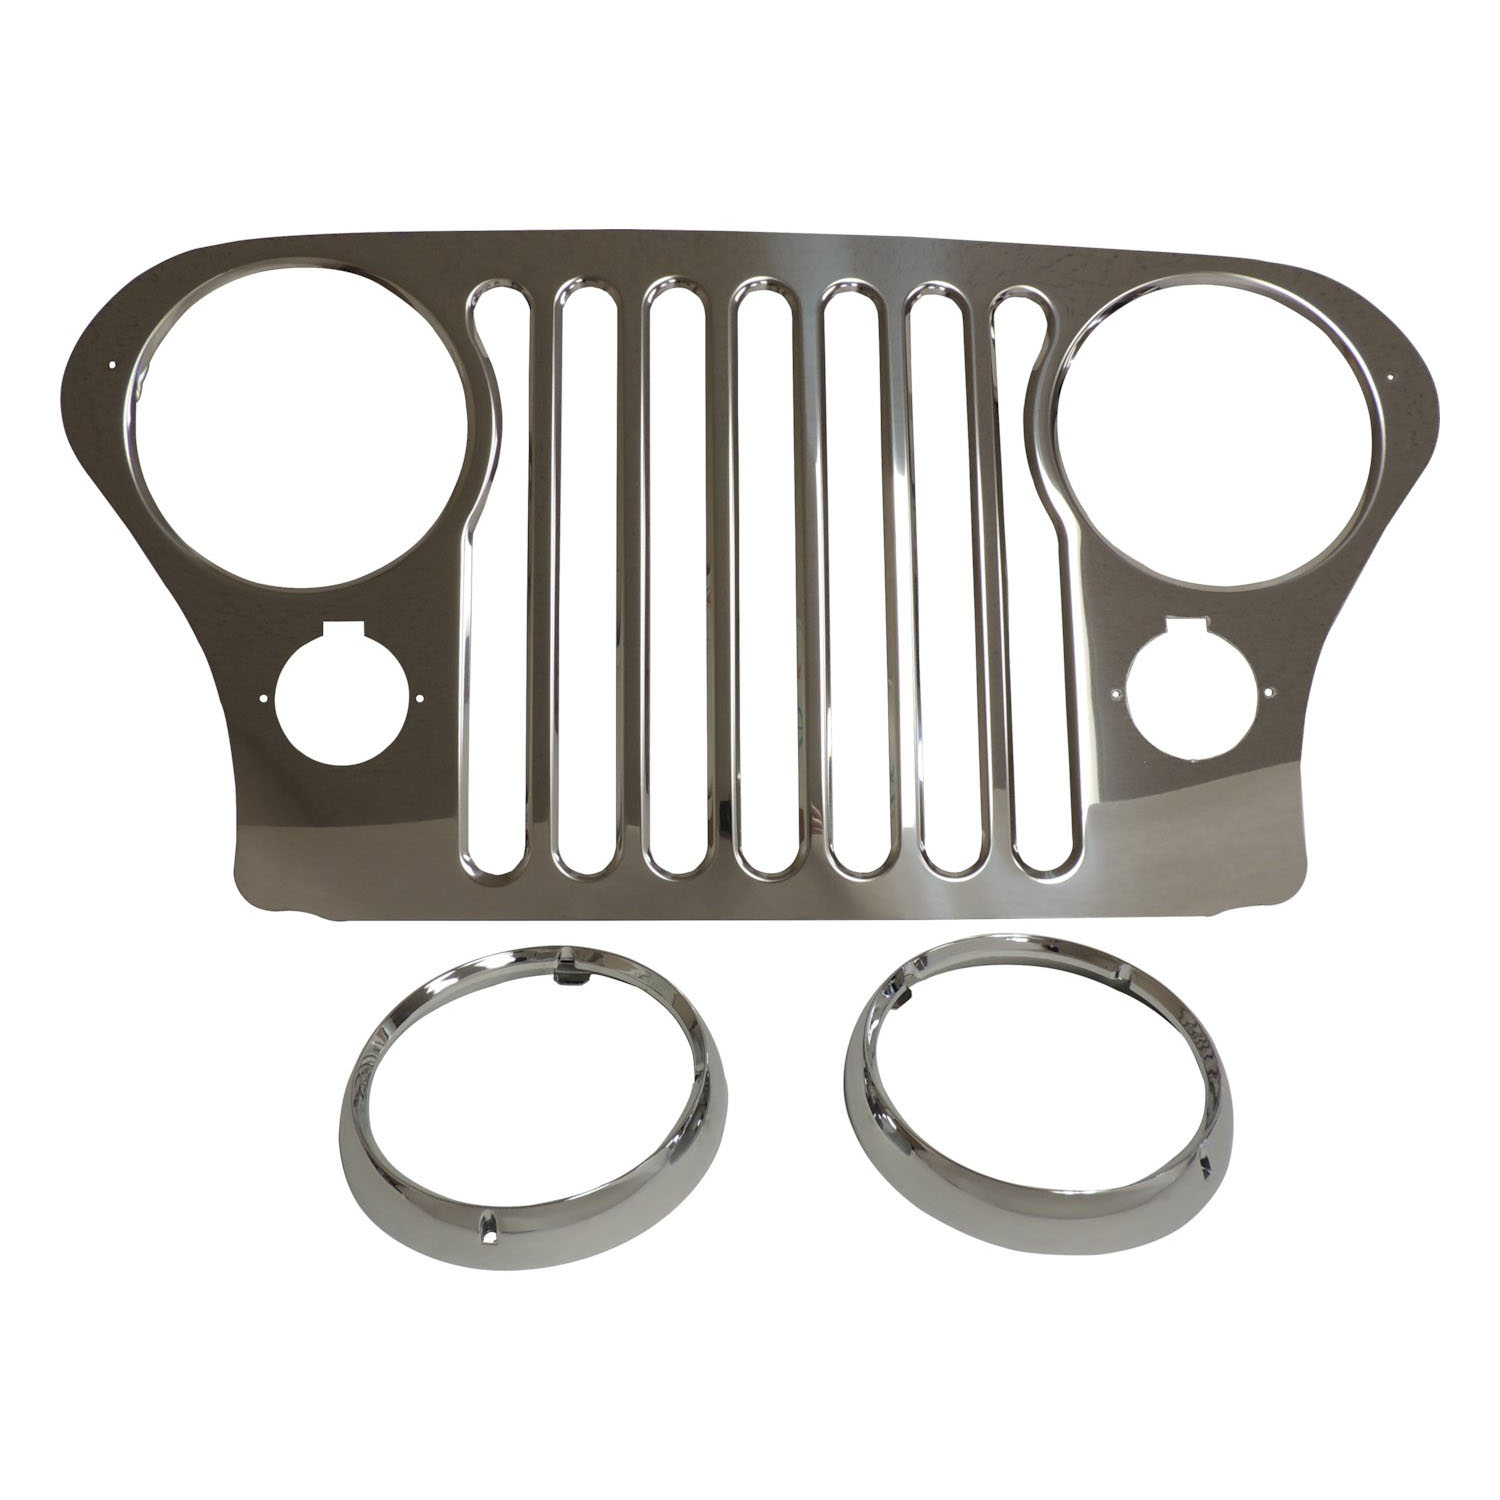 Jeep CJ Grille Overlay 76-86 Stainless Steel